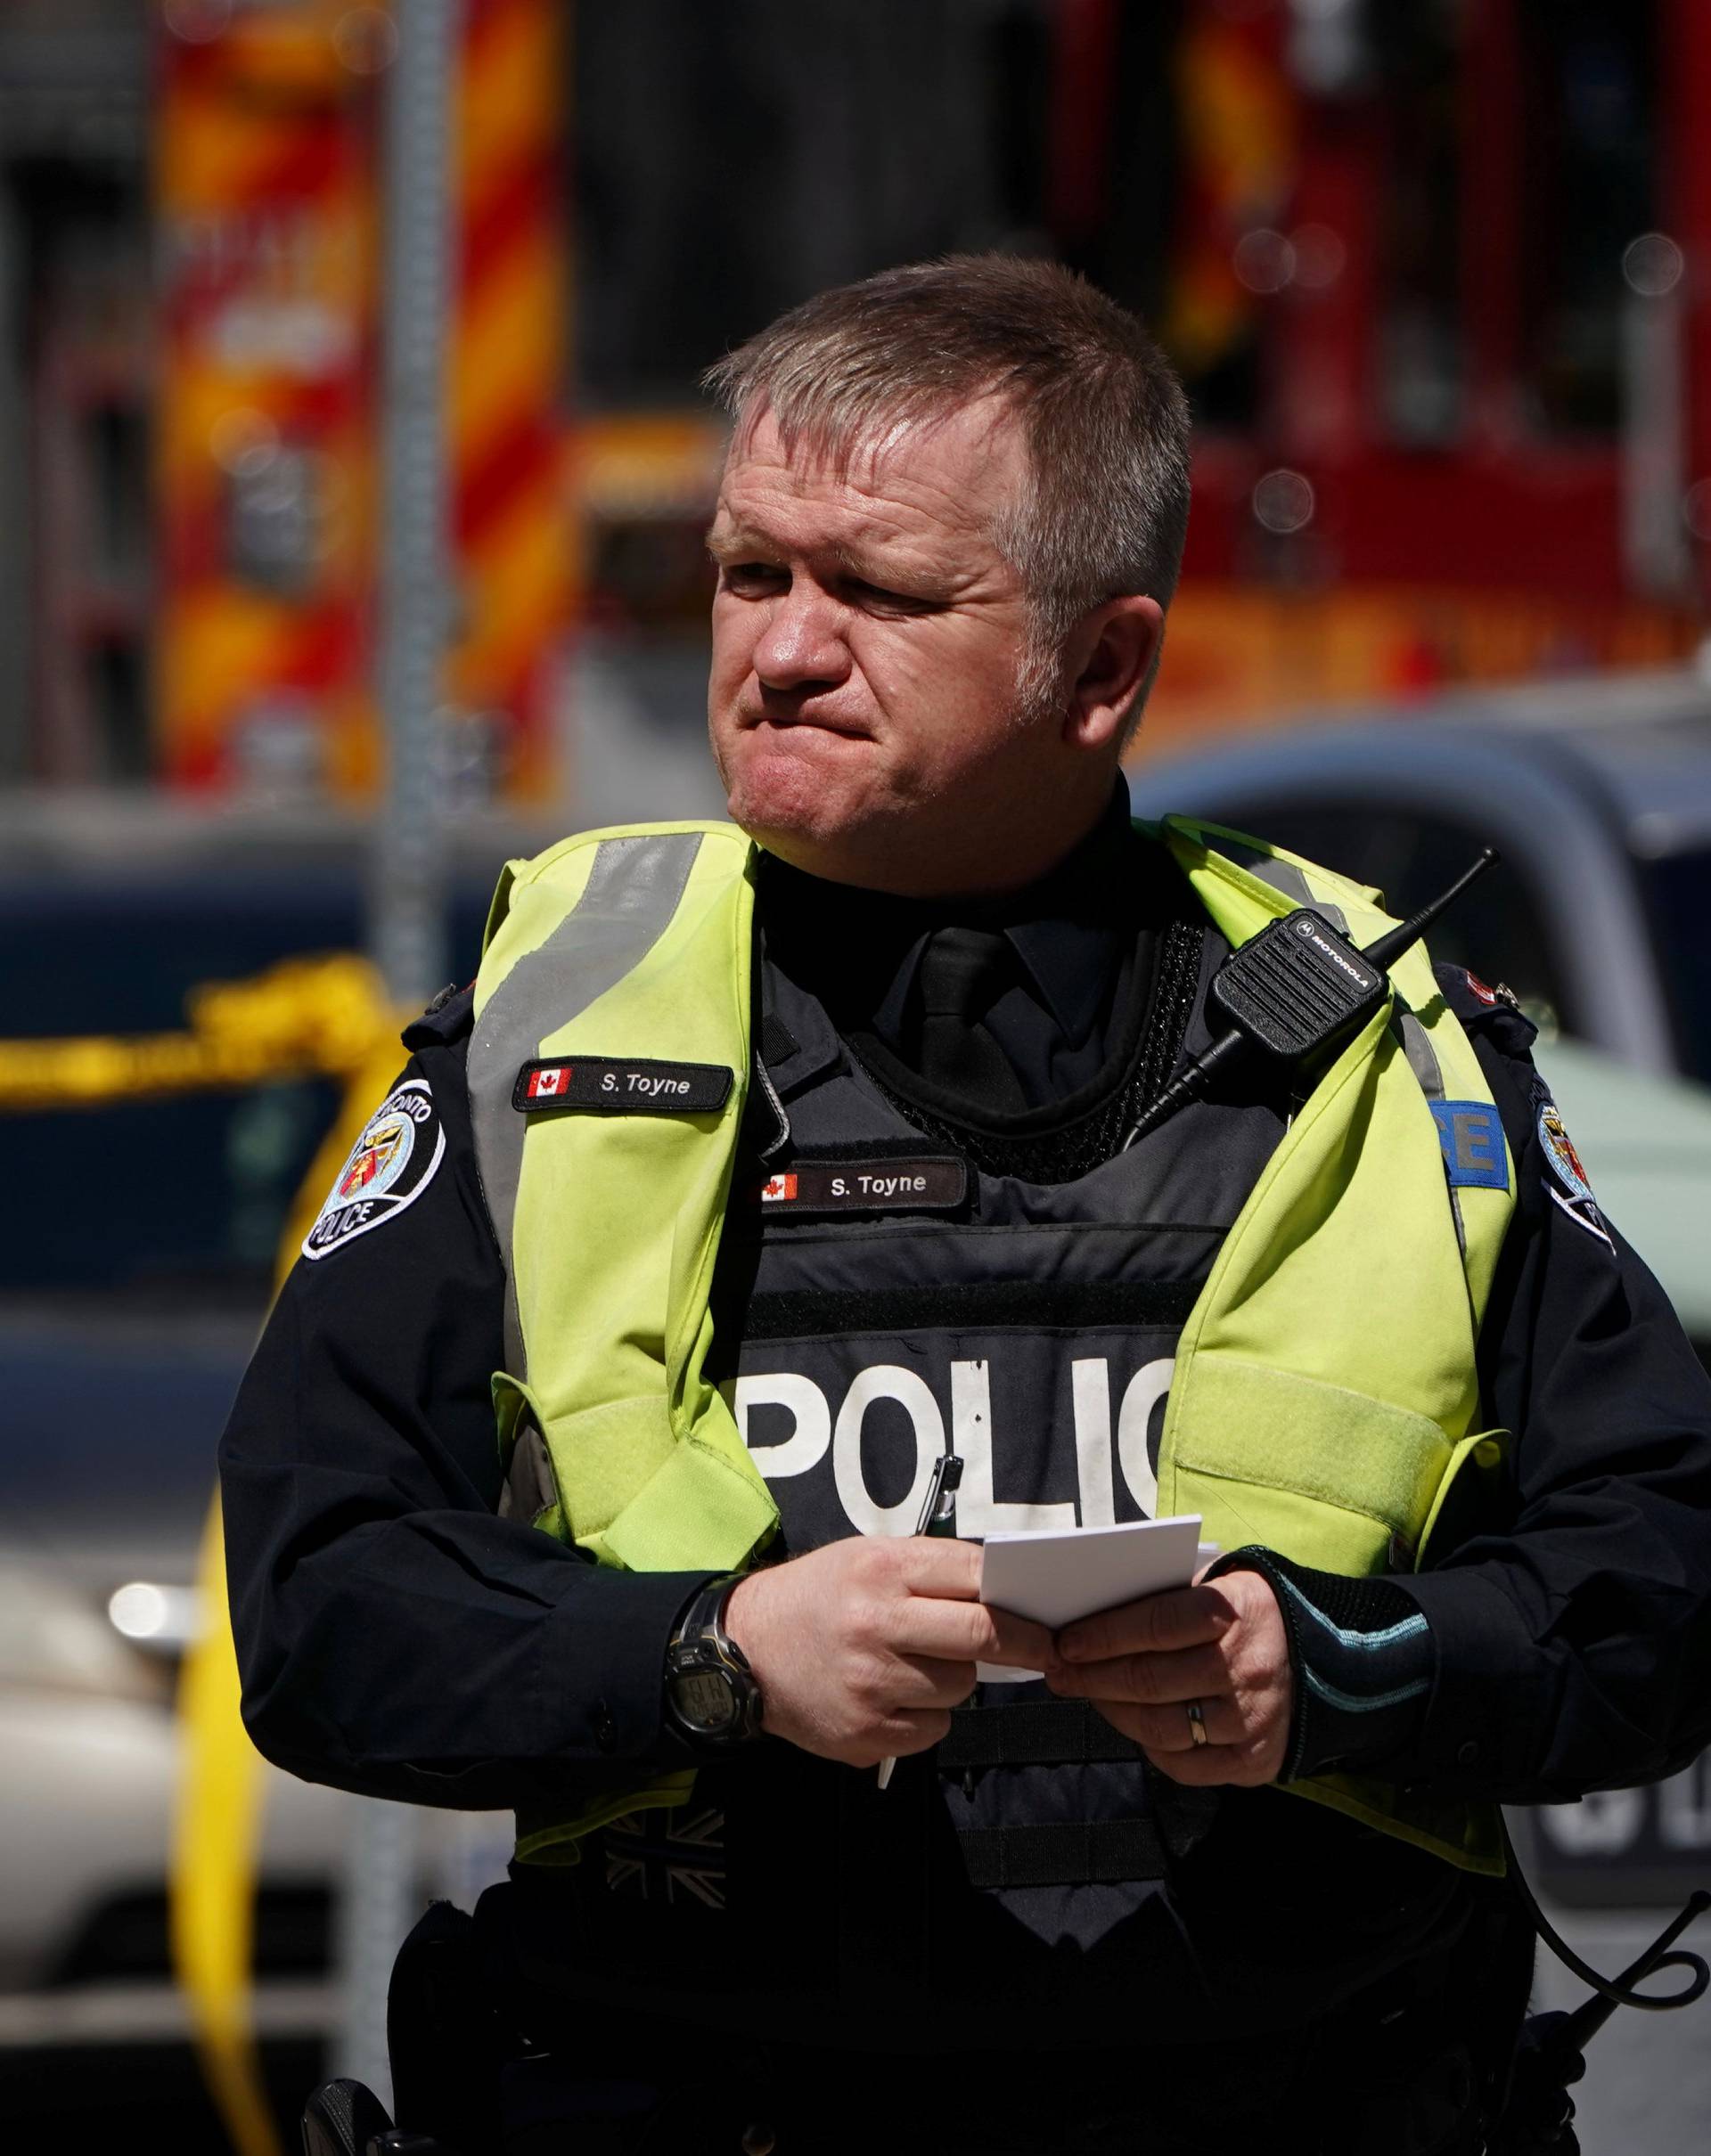 A pedestrian officer responds to an incident where van struck multiple people at a major intersection in Toronto's northern suburbs in Toronto